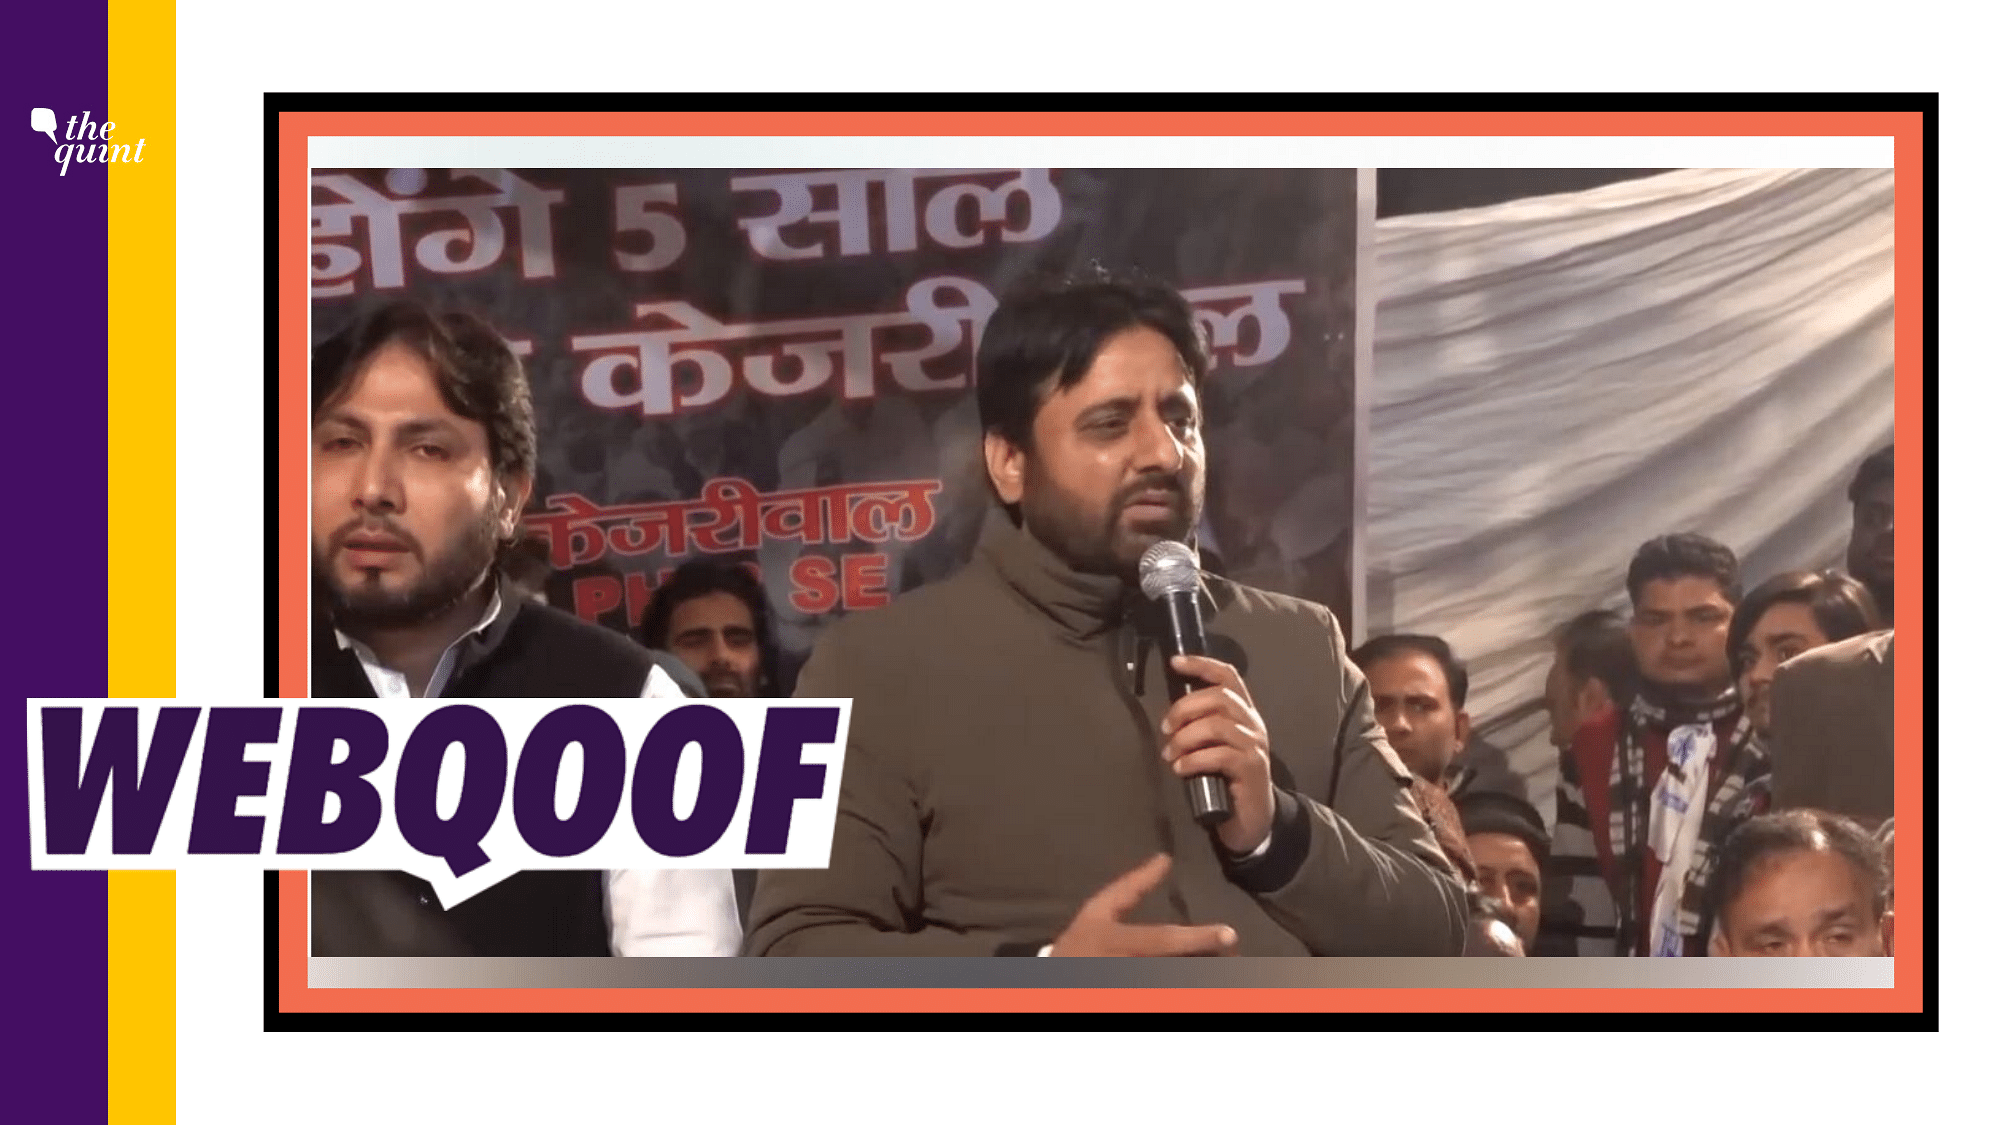 A video in which Aam Aadmi Party (AAP) MLA Amanatullah Khan is giving a fiery campaign speech is going viral, with the claim that in his speech, he said that “We will become Sharia”.